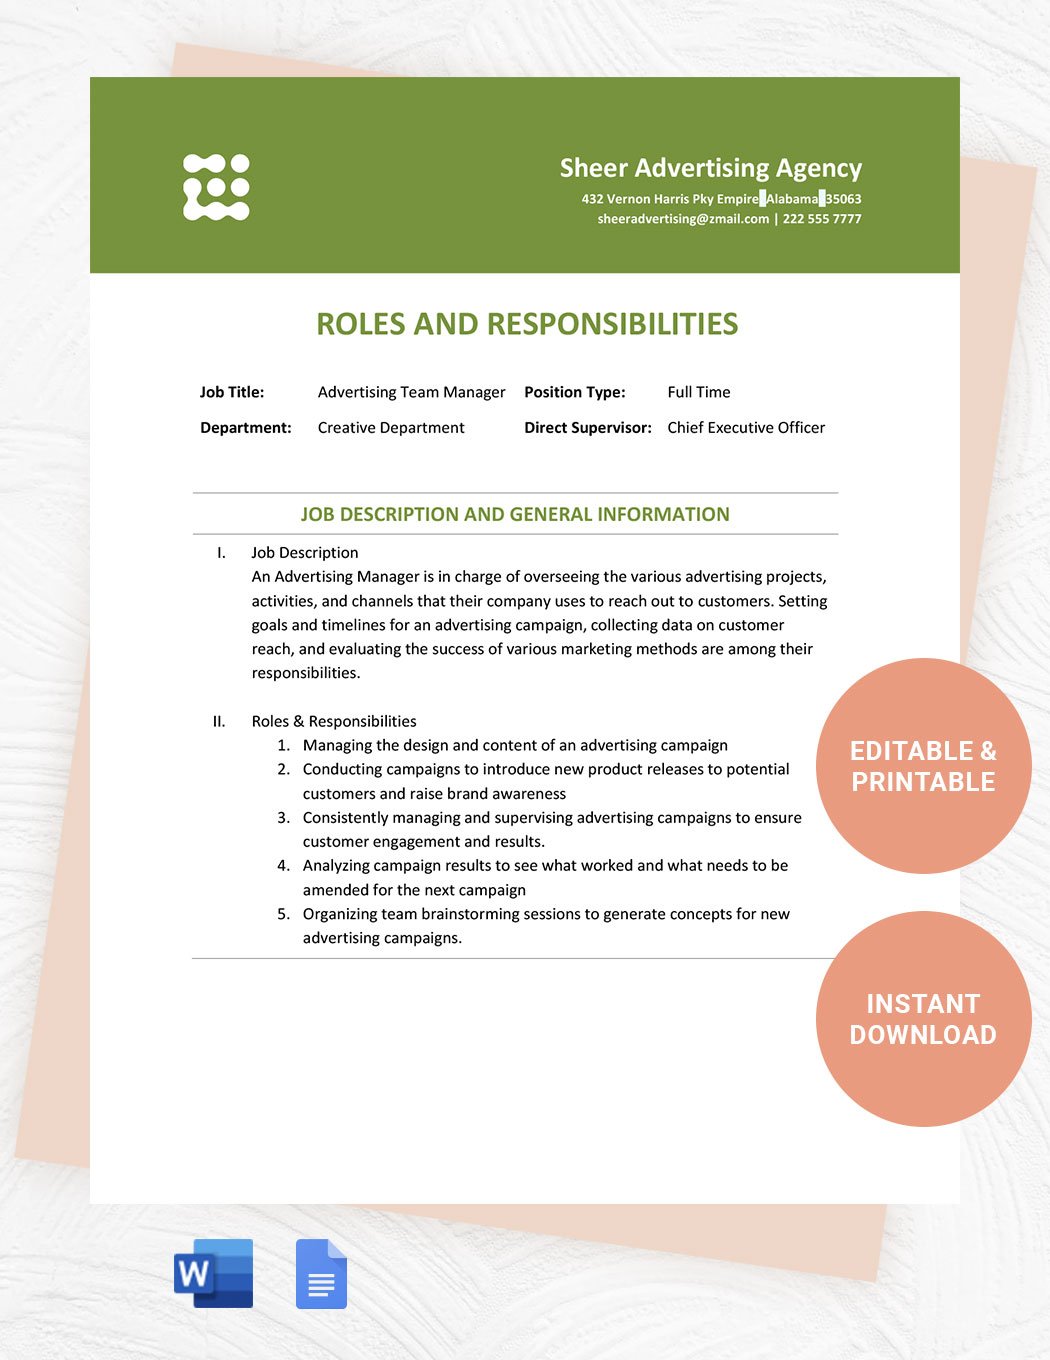 Team Roles And Responsibilities Template